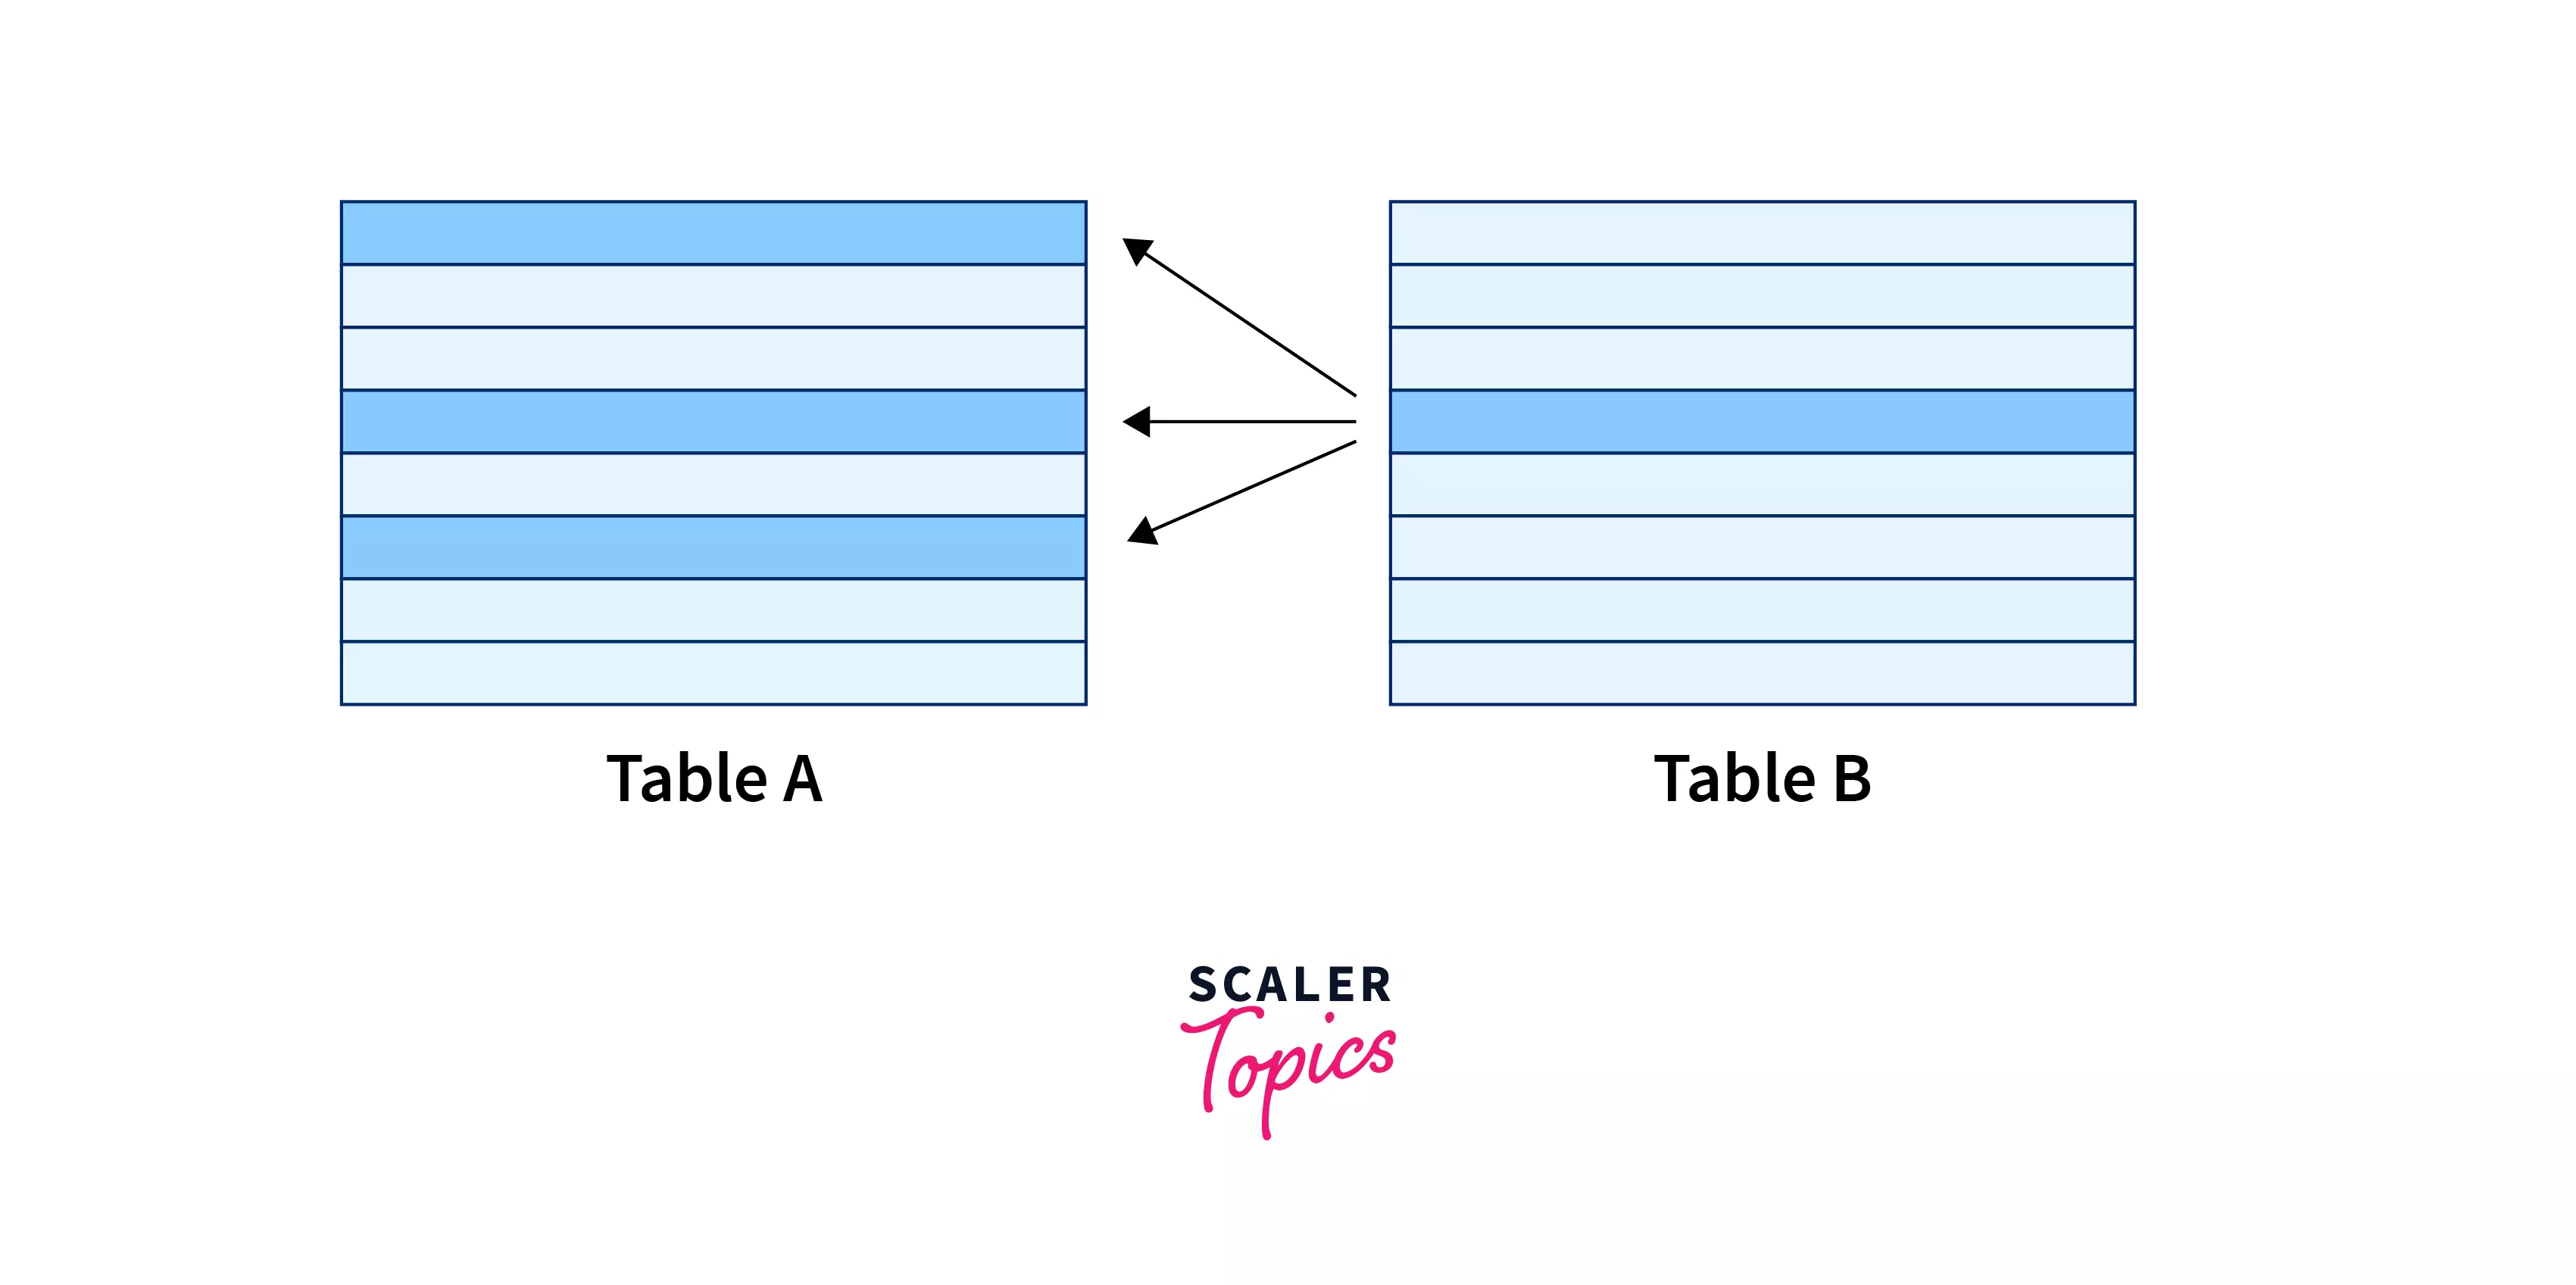 Second example of the many-to-many relationship between the tables